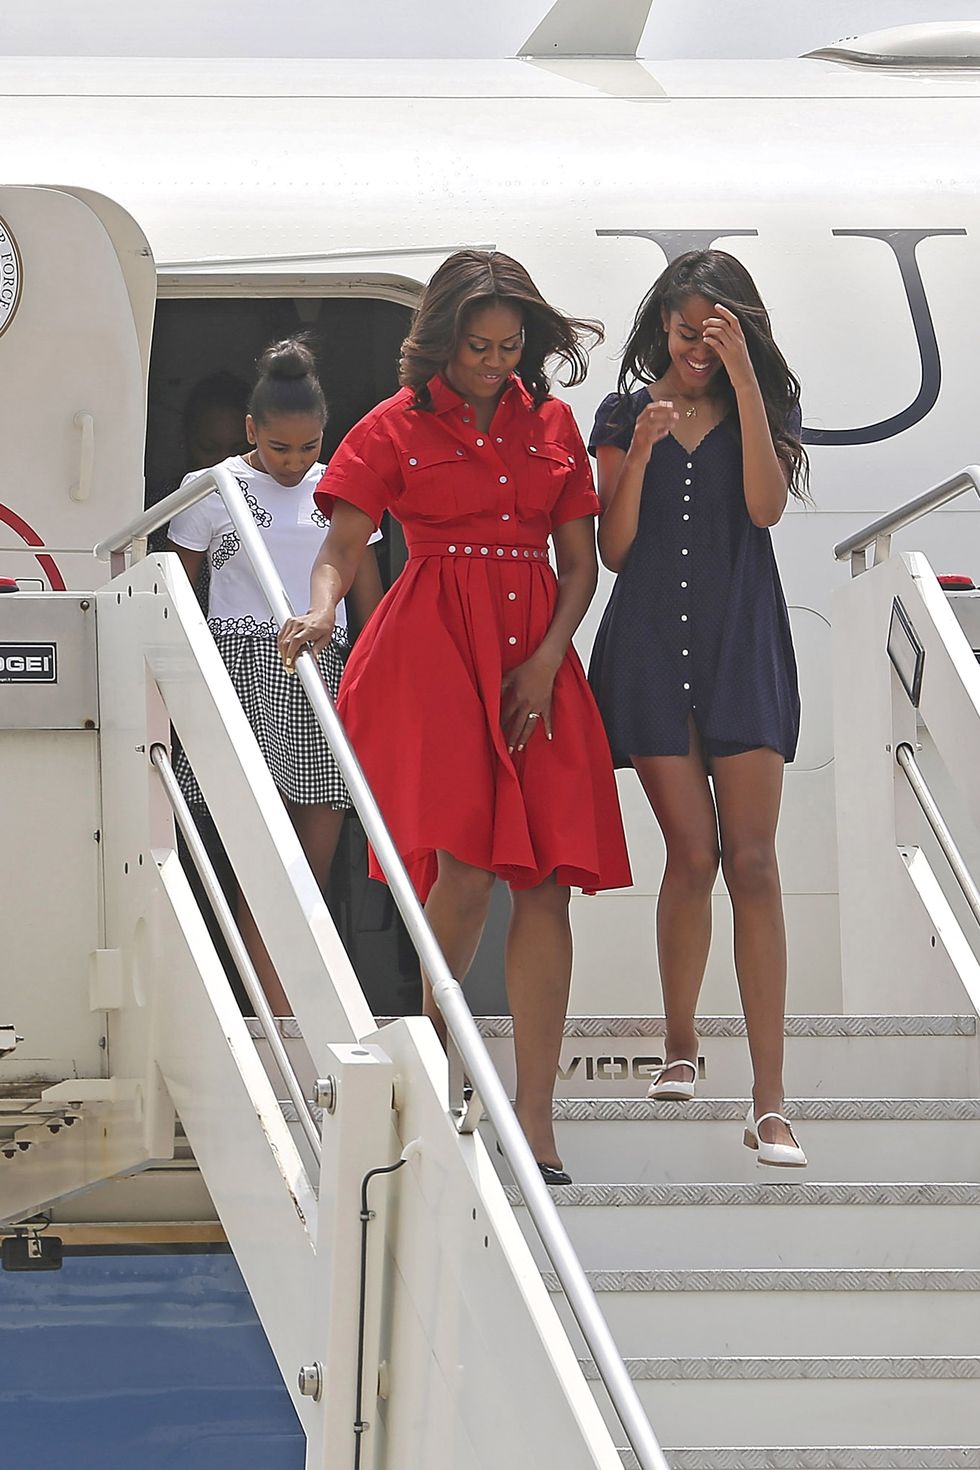 VENICE, ITALY - JUNE 19: First Lady Michelle Obama (C) arrives with daughters Malia Obama (R) and Sasha Obama (L) on June 19, 2015 in Venice, Italy. Michelle Obama has travelled to Italy where she is expected to speak about her 'Let's Move' initiative to combat childhood obesity.  (Photo by Awakening/Getty Images)